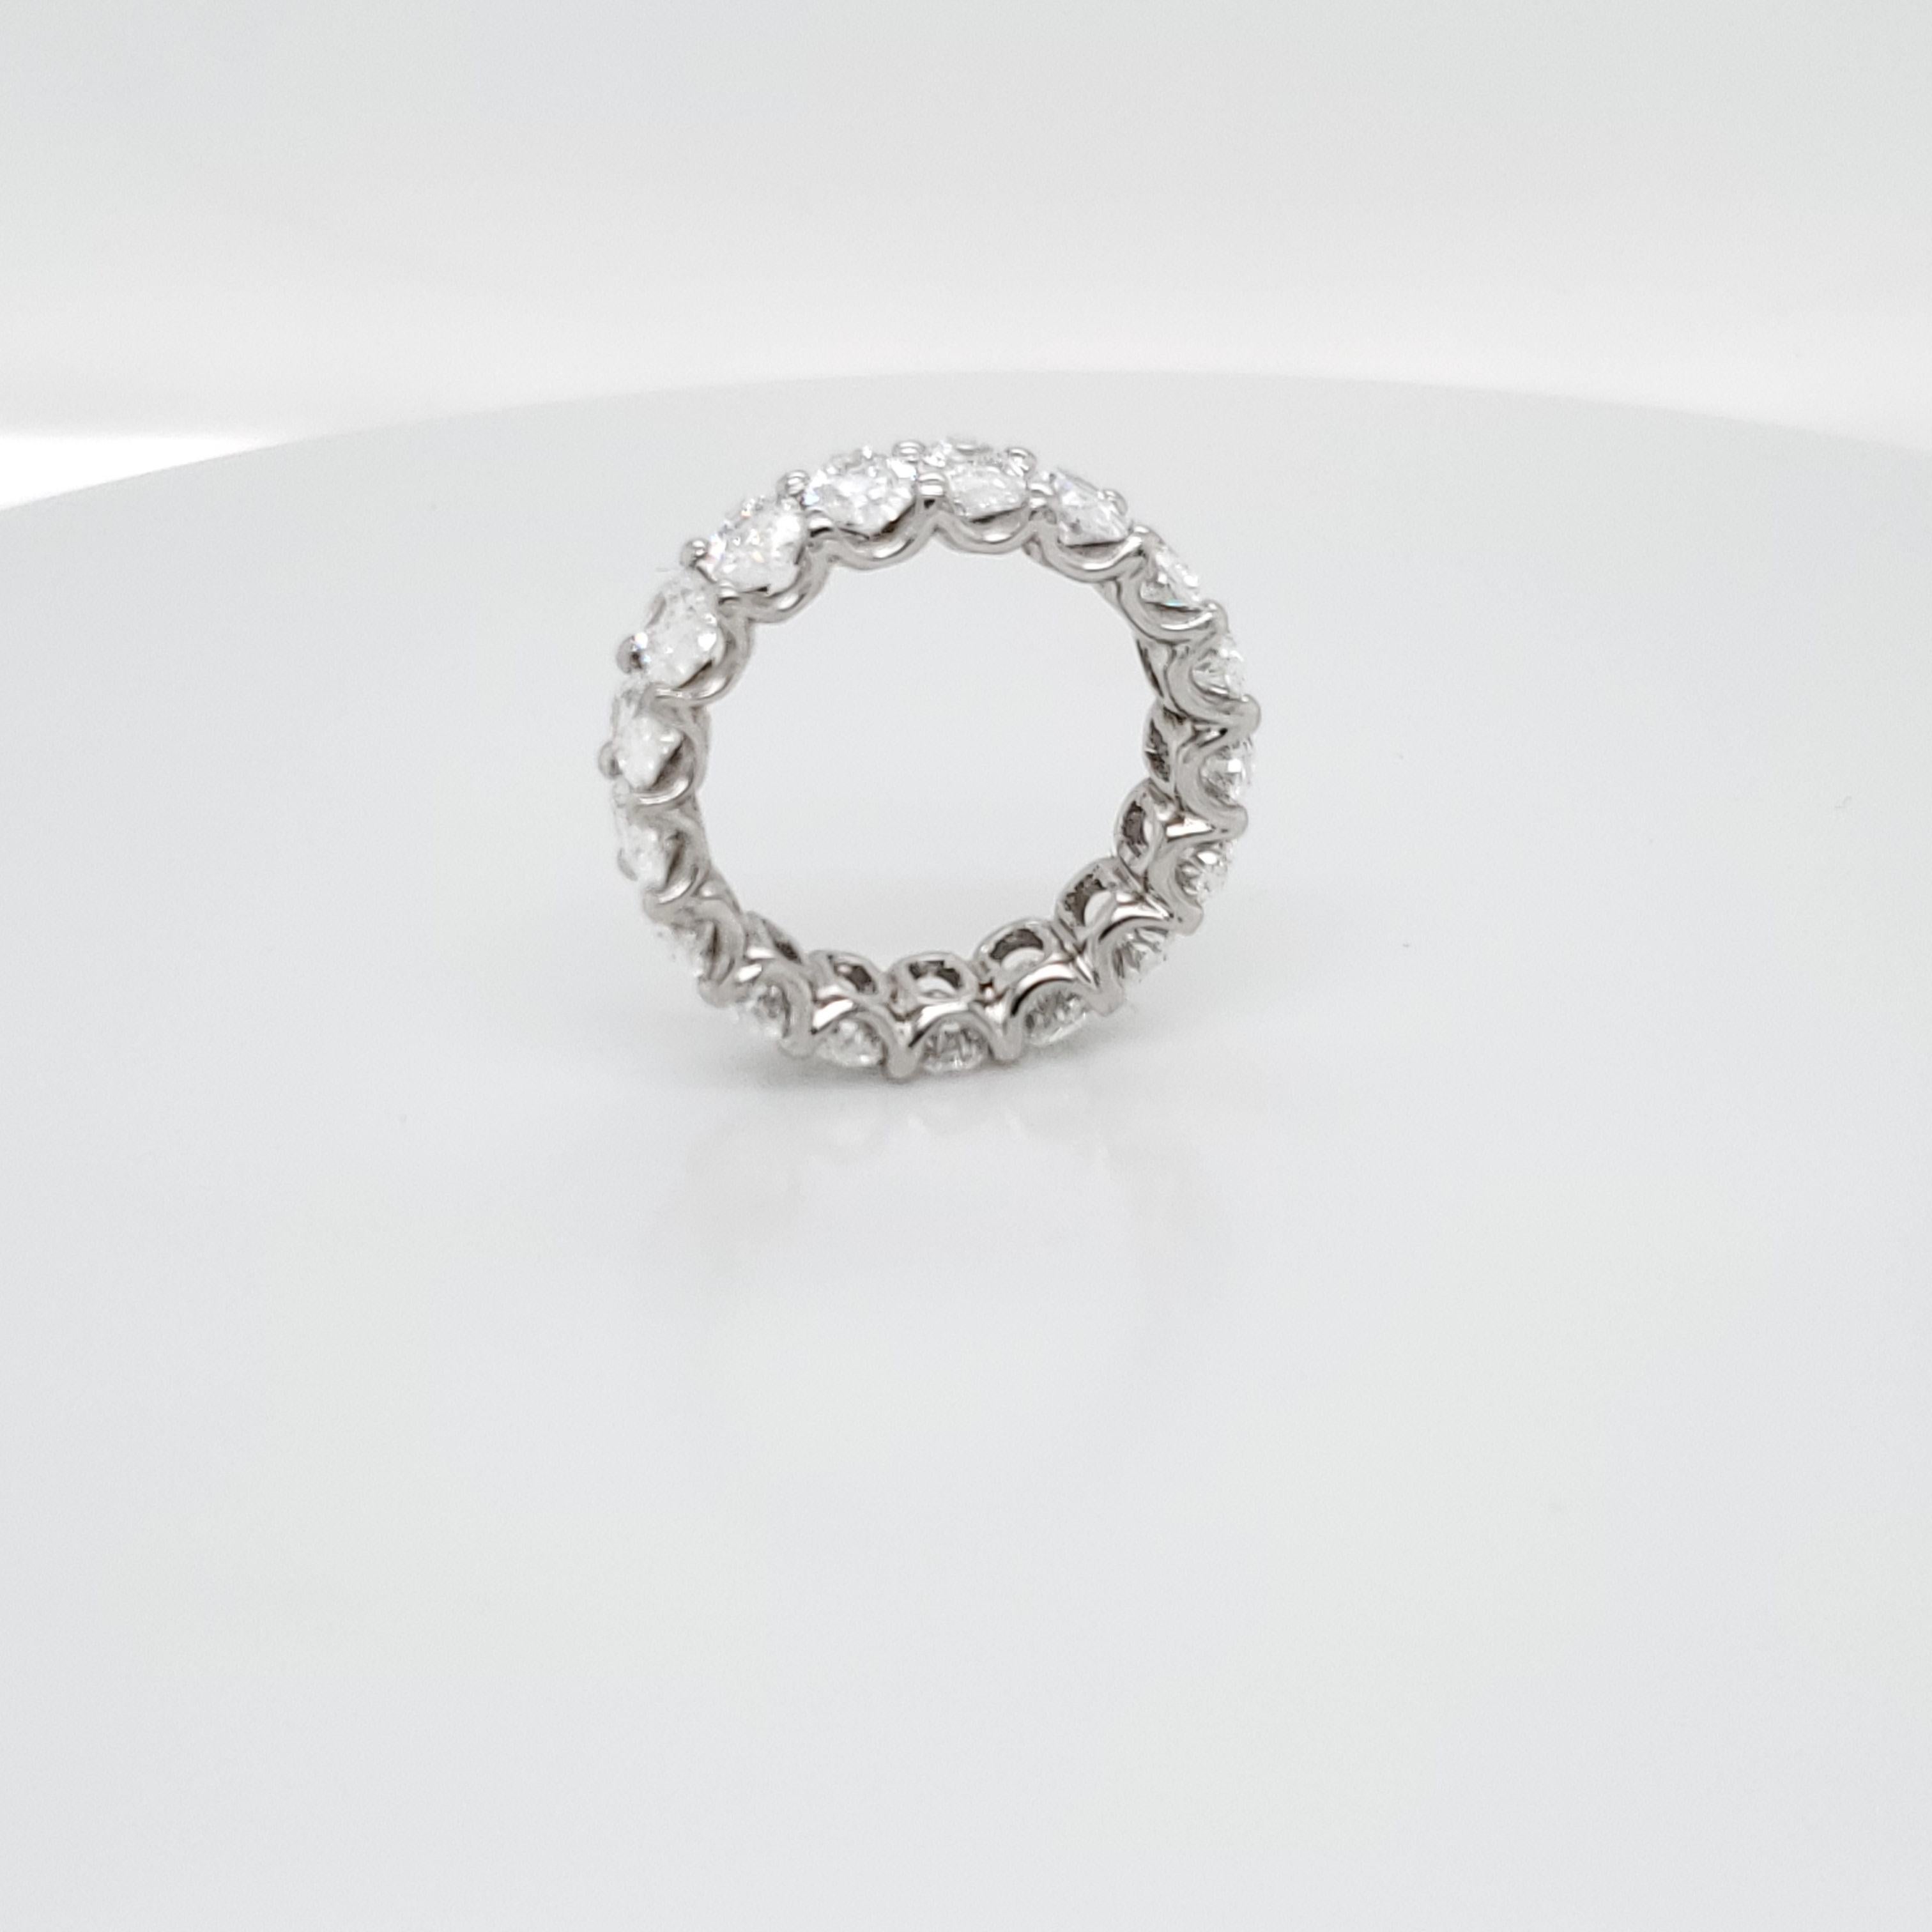 oval cut eternity band with 17 ovals weighing 5.87 carats. Average color is F and VVS quality. 